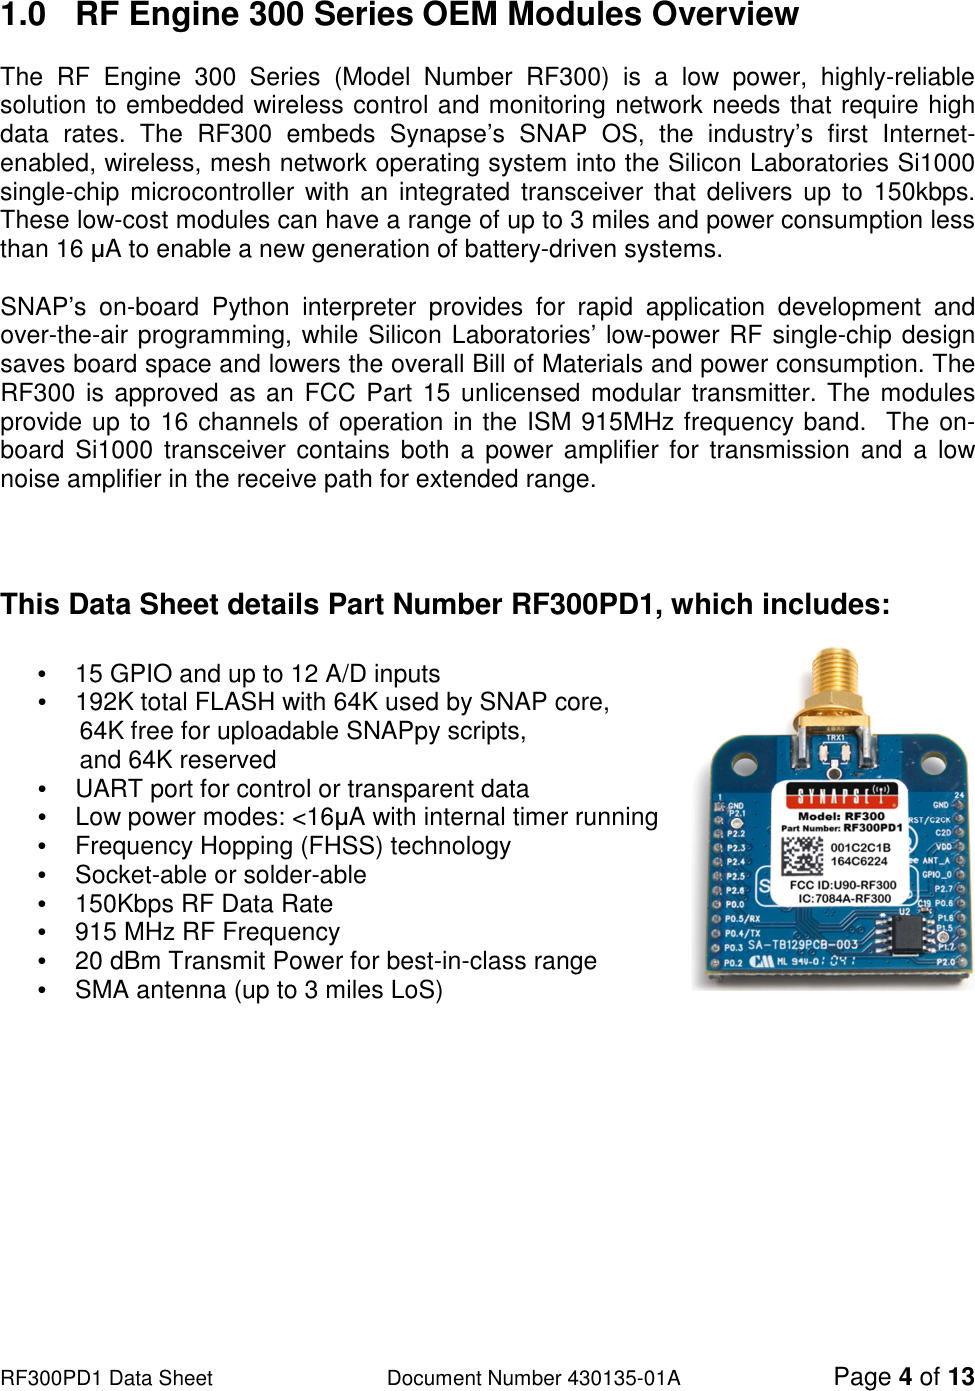                                                                                                                                                                          RF300PD1 Data Sheet                   Document Number 430135-01A Page 4 of 13  1.0  RF Engine 300 Series OEM Modules Overview  The  RF  Engine  300  Series  (Model  Number  RF300)  is  a  low  power,  highly-reliable solution to embedded wireless control and monitoring network needs that require high data  rates.  The  RF300  embeds  Synapse’s  SNAP  OS,  the  industry’s  first  Internet-enabled, wireless, mesh network operating system into the Silicon Laboratories Si1000 single-chip  microcontroller  with an  integrated  transceiver that  delivers  up  to  150kbps. These low-cost modules can have a range of up to 3 miles and power consumption less than 16 µA to enable a new generation of battery-driven systems.  SNAP’s  on-board  Python  interpreter  provides  for  rapid  application  development  and over-the-air programming, while Silicon Laboratories’ low-power RF single-chip design saves board space and lowers the overall Bill of Materials and power consumption. The RF300  is approved as an FCC Part 15 unlicensed modular transmitter. The modules provide up to 16 channels of operation in the ISM 915MHz frequency band.  The on-board  Si1000  transceiver contains  both  a power amplifier for transmission and  a  low noise amplifier in the receive path for extended range.    This Data Sheet details Part Number RF300PD1, which includes:  •  15 GPIO and up to 12 A/D inputs                            •  192K total FLASH with 64K used by SNAP core,        64K free for uploadable SNAPpy scripts,        and 64K reserved •  UART port for control or transparent data •  Low power modes: &lt;16µA with internal timer running •  Frequency Hopping (FHSS) technology  •  Socket-able or solder-able •  150Kbps RF Data Rate •  915 MHz RF Frequency •  20 dBm Transmit Power for best-in-class range •  SMA antenna (up to 3 miles LoS)    